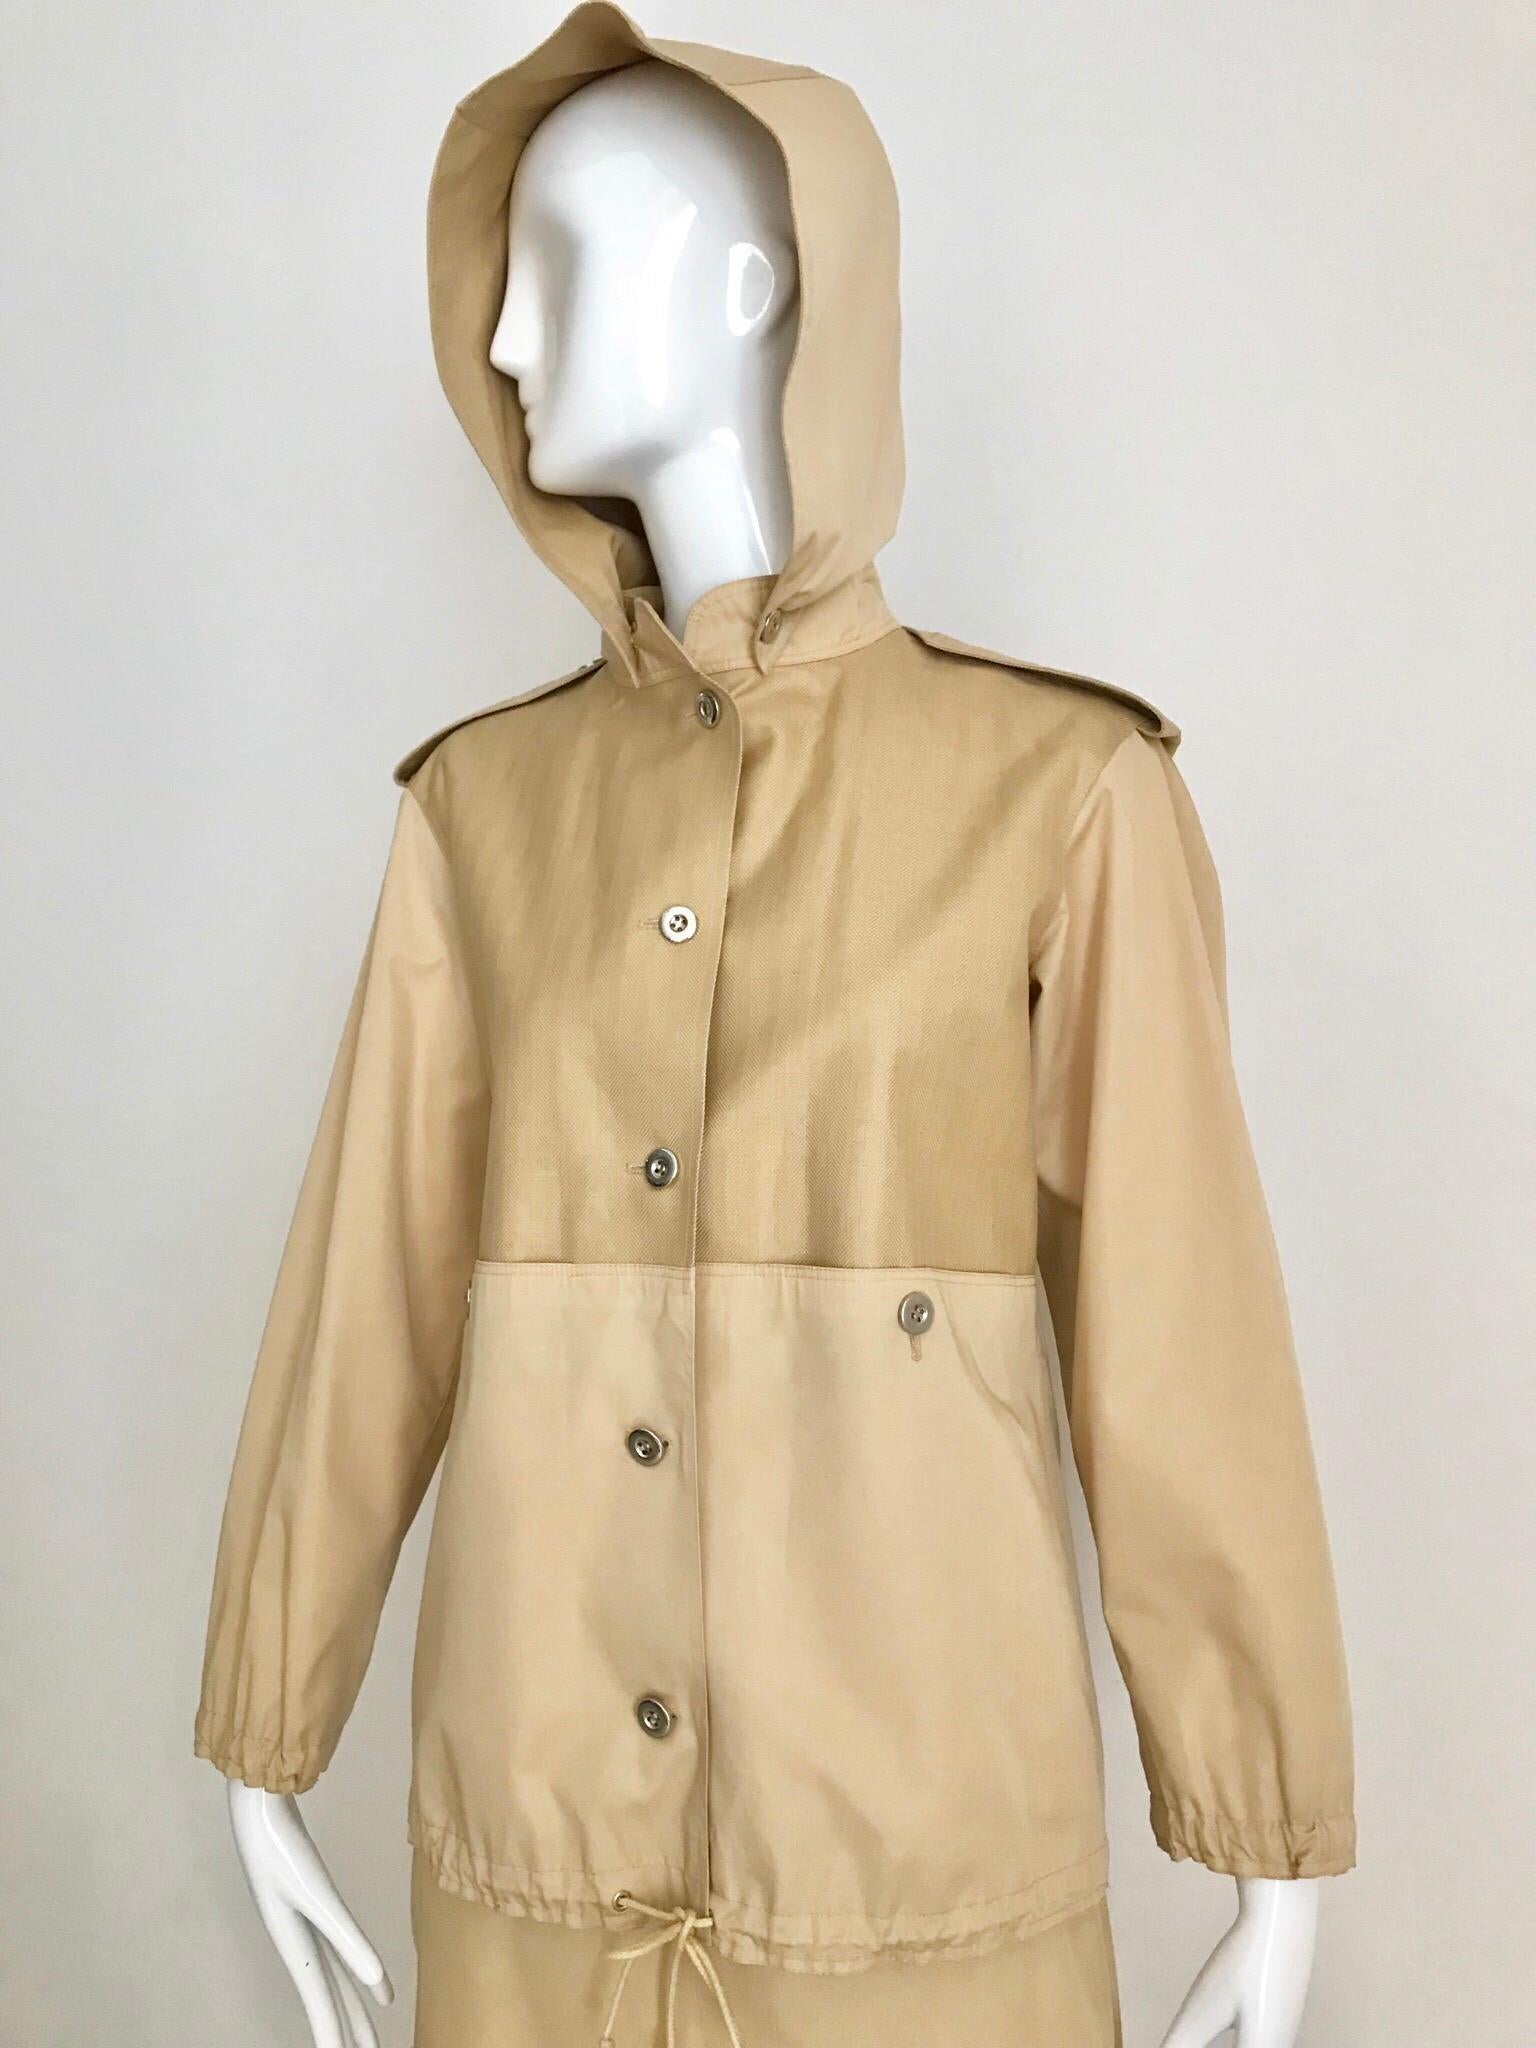 Vintage Andrè Courréges Tan cotton sports jacket and pencil skirt ensemble.
Button jacket with pockets and detachable hood. Sporty and chic!
Size: Small - Medium
Jacket measurement:  Bust: 38 inches/ Waist: 38 inches/ Hip: 38 inches/ Sleeve: 21